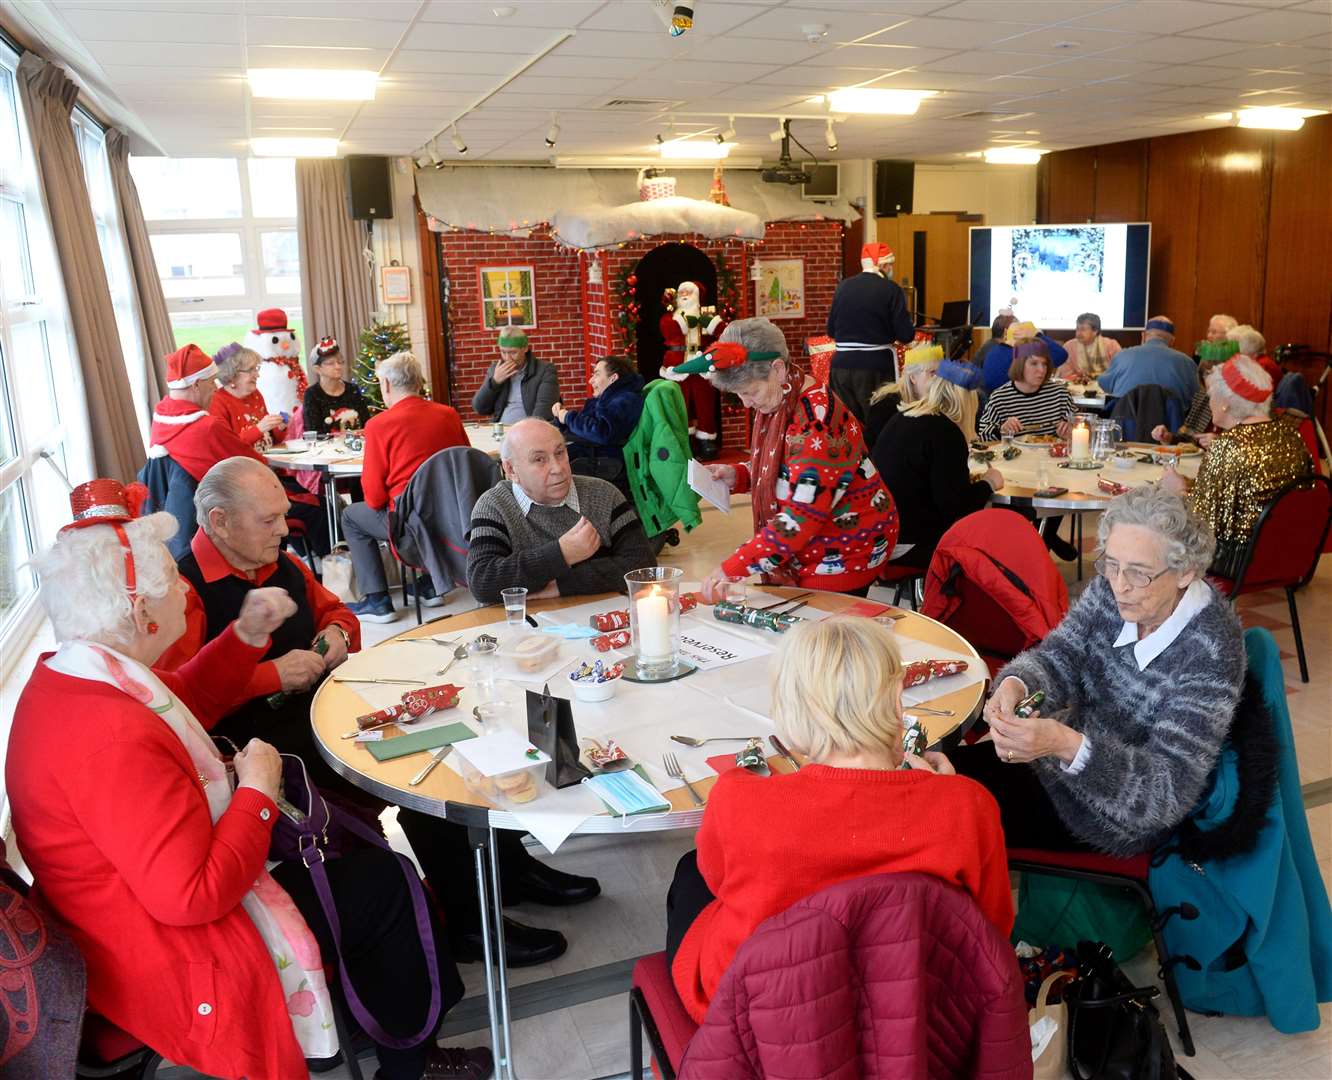 Members of Merkinch Community Centre's lunch club enjoy their festive meal.